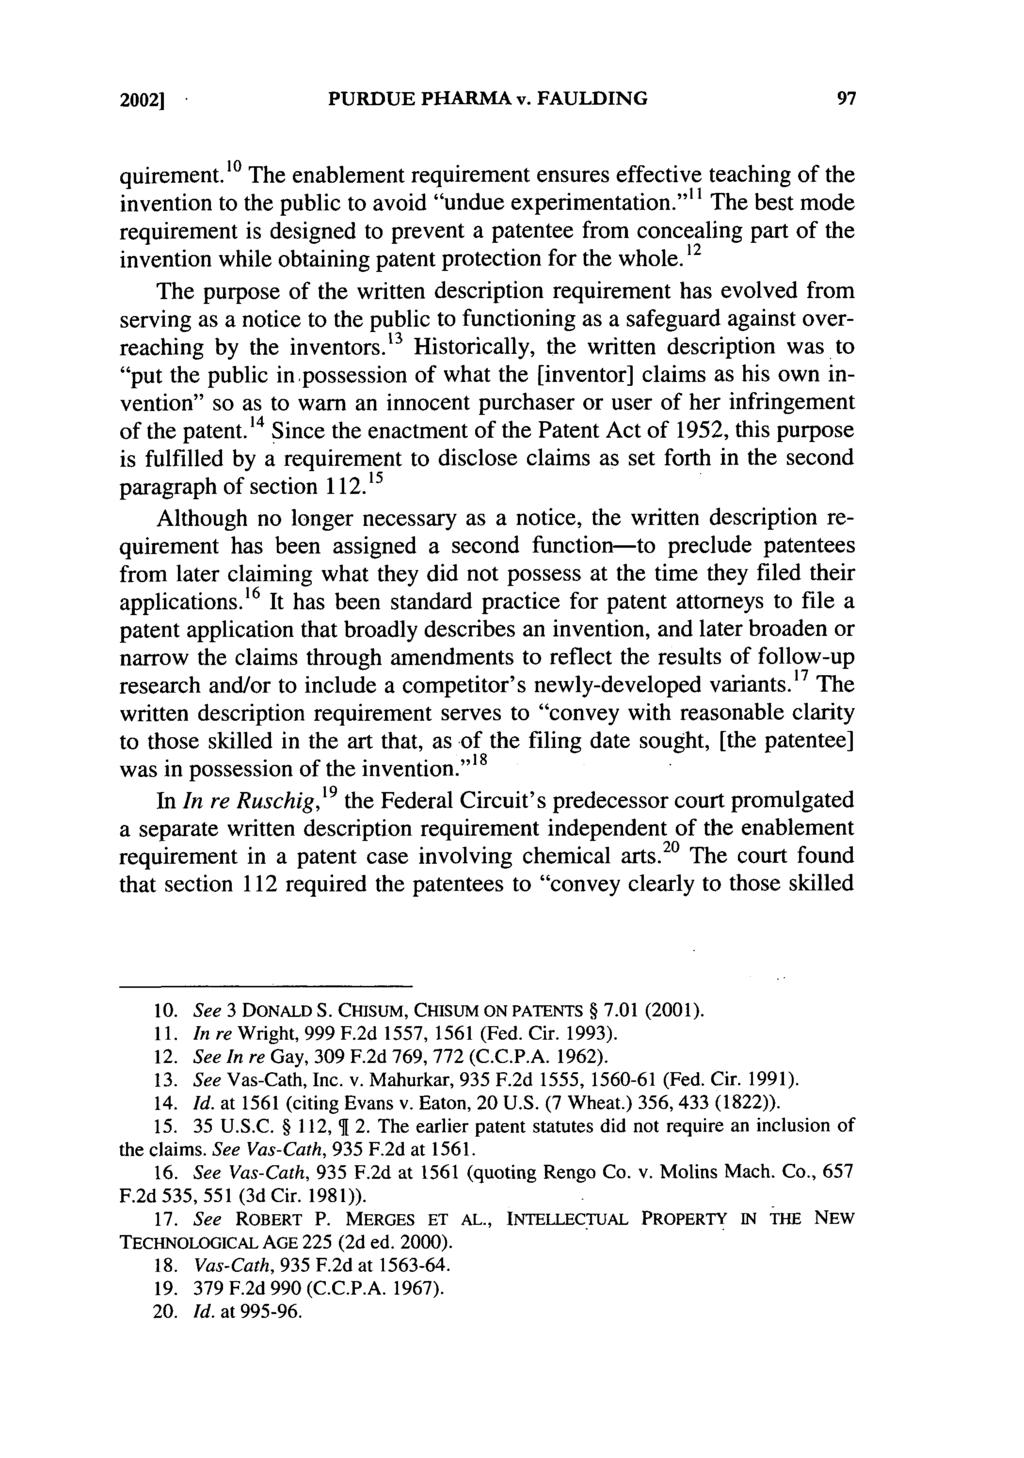 20021 PURDUE PHARMA v. FAULDING quirement.1 0 The enablement requirement ensures effective teaching of the invention to the public to avoid "undue experimentation.